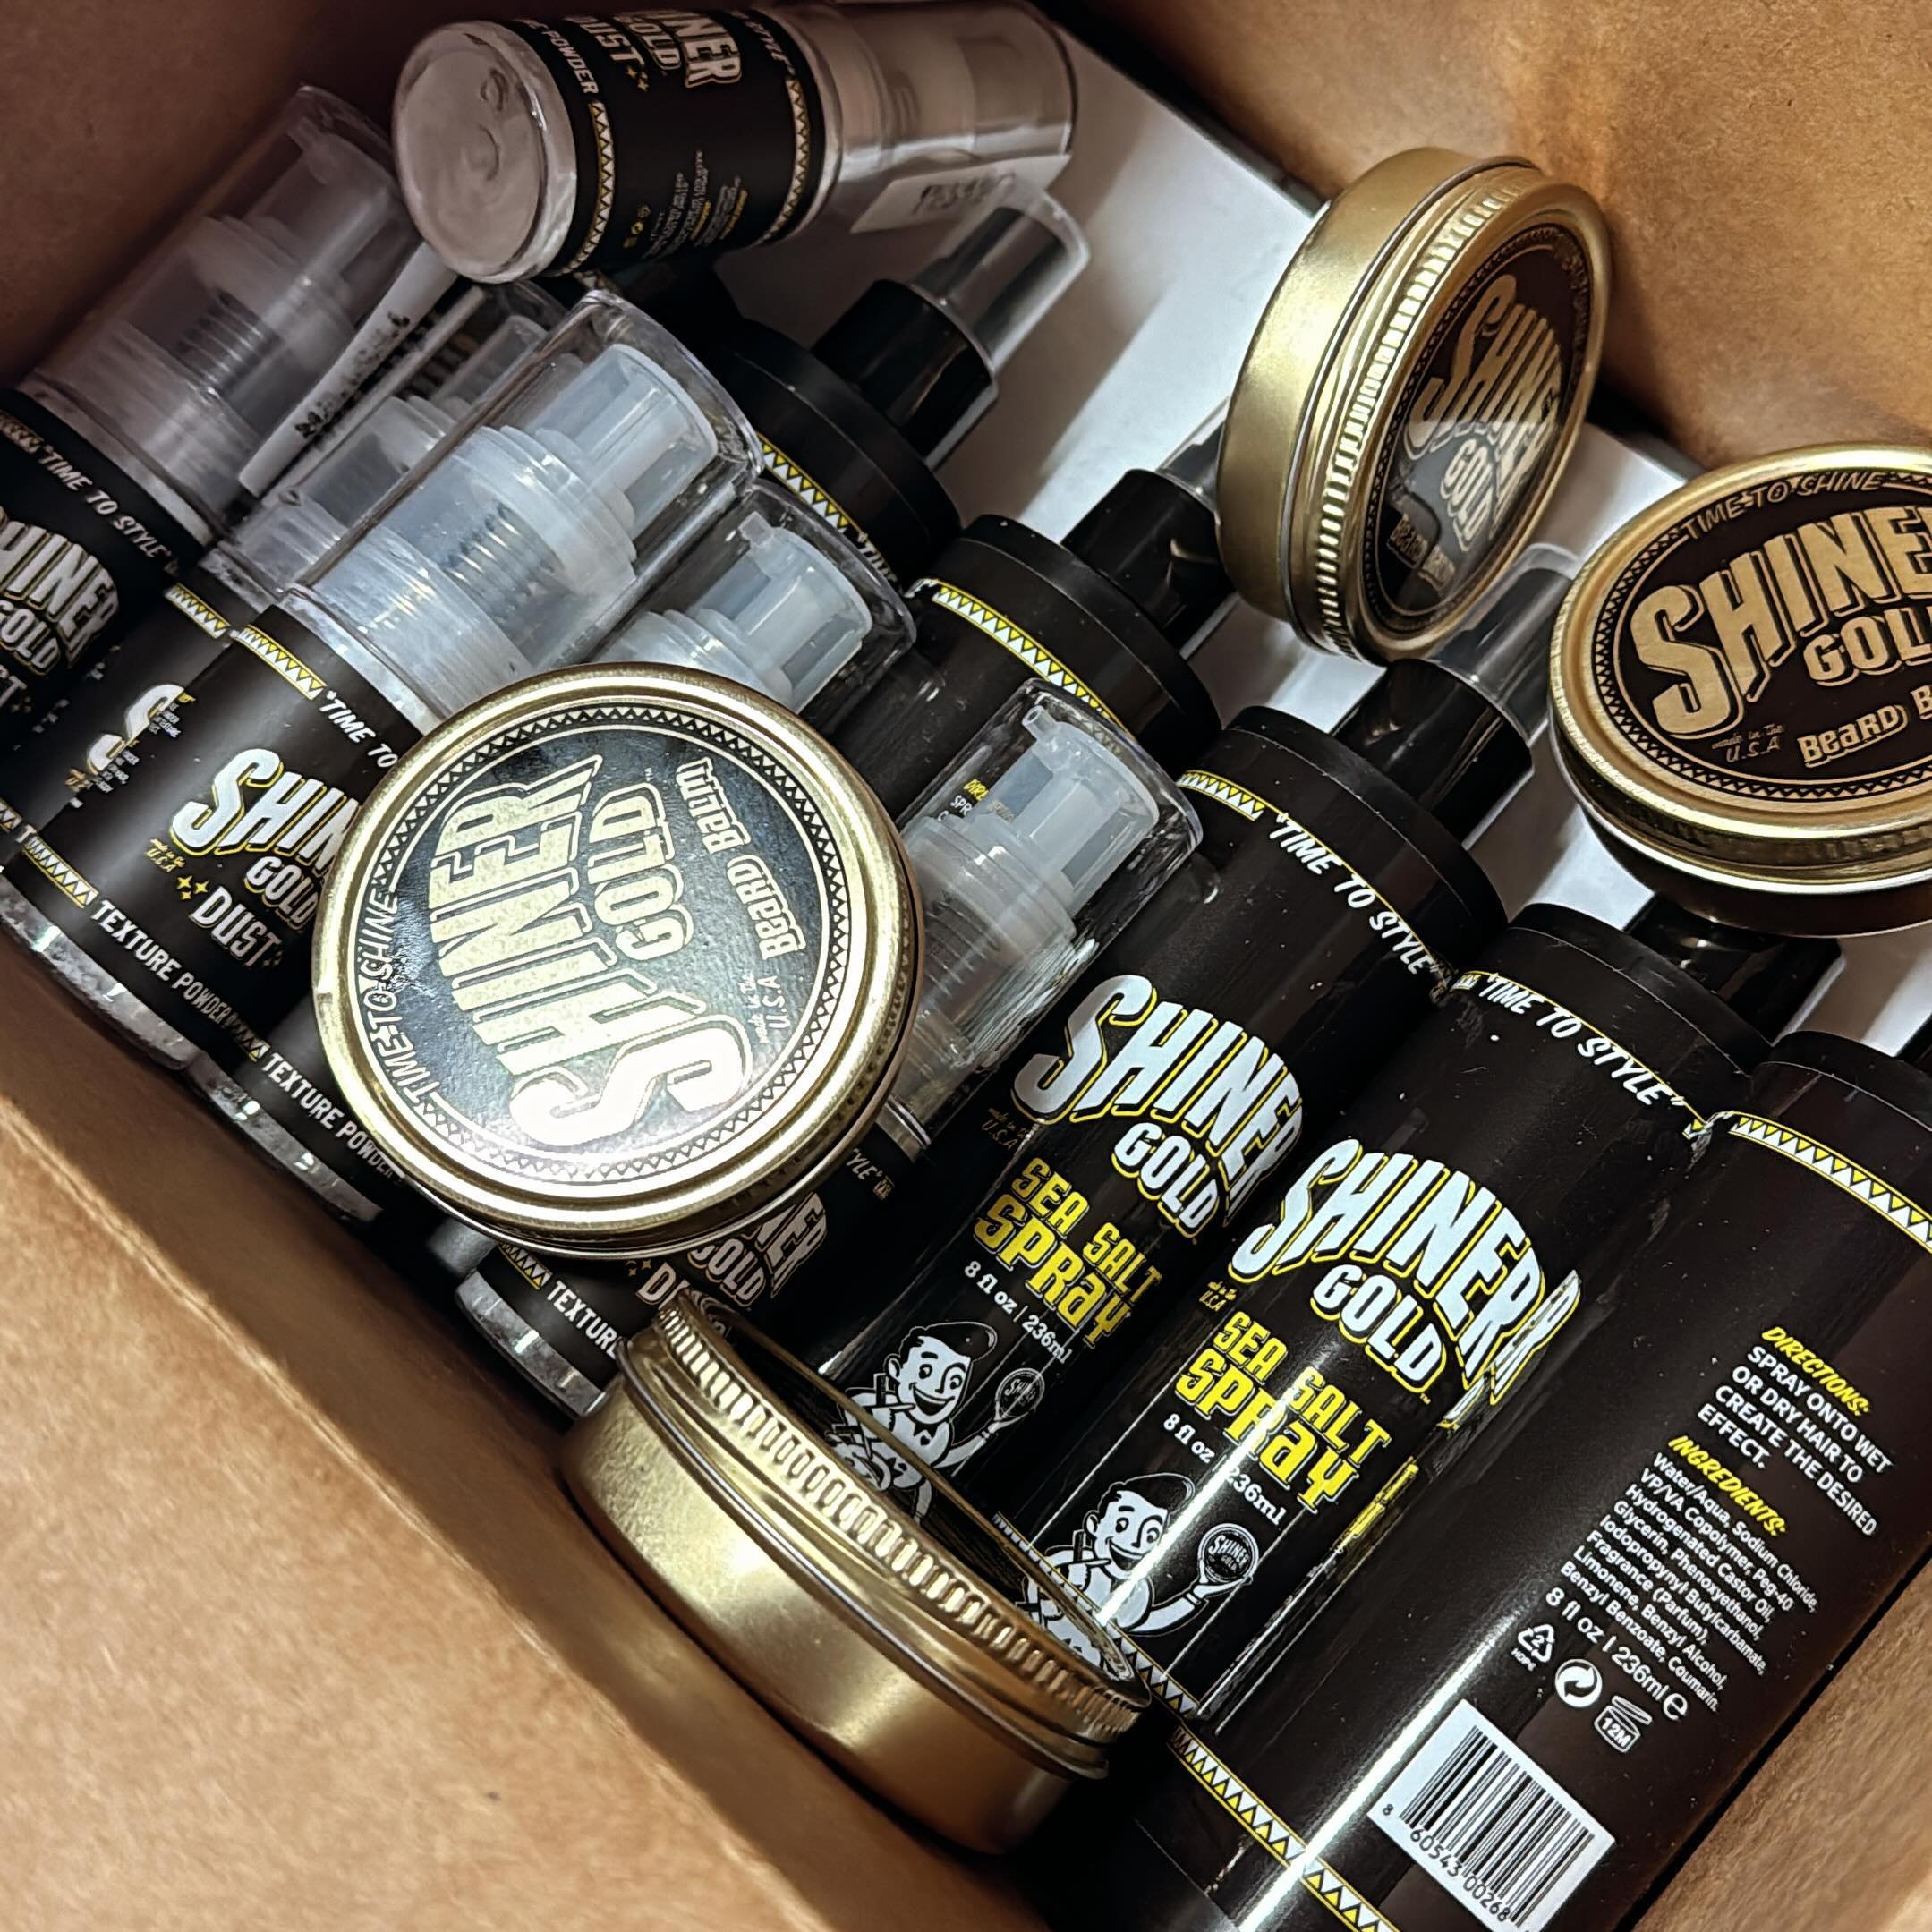 So many new things are arriving!! 🥰 @shinergoldpomade #barbershop #haircutgarage #new #shopsmall